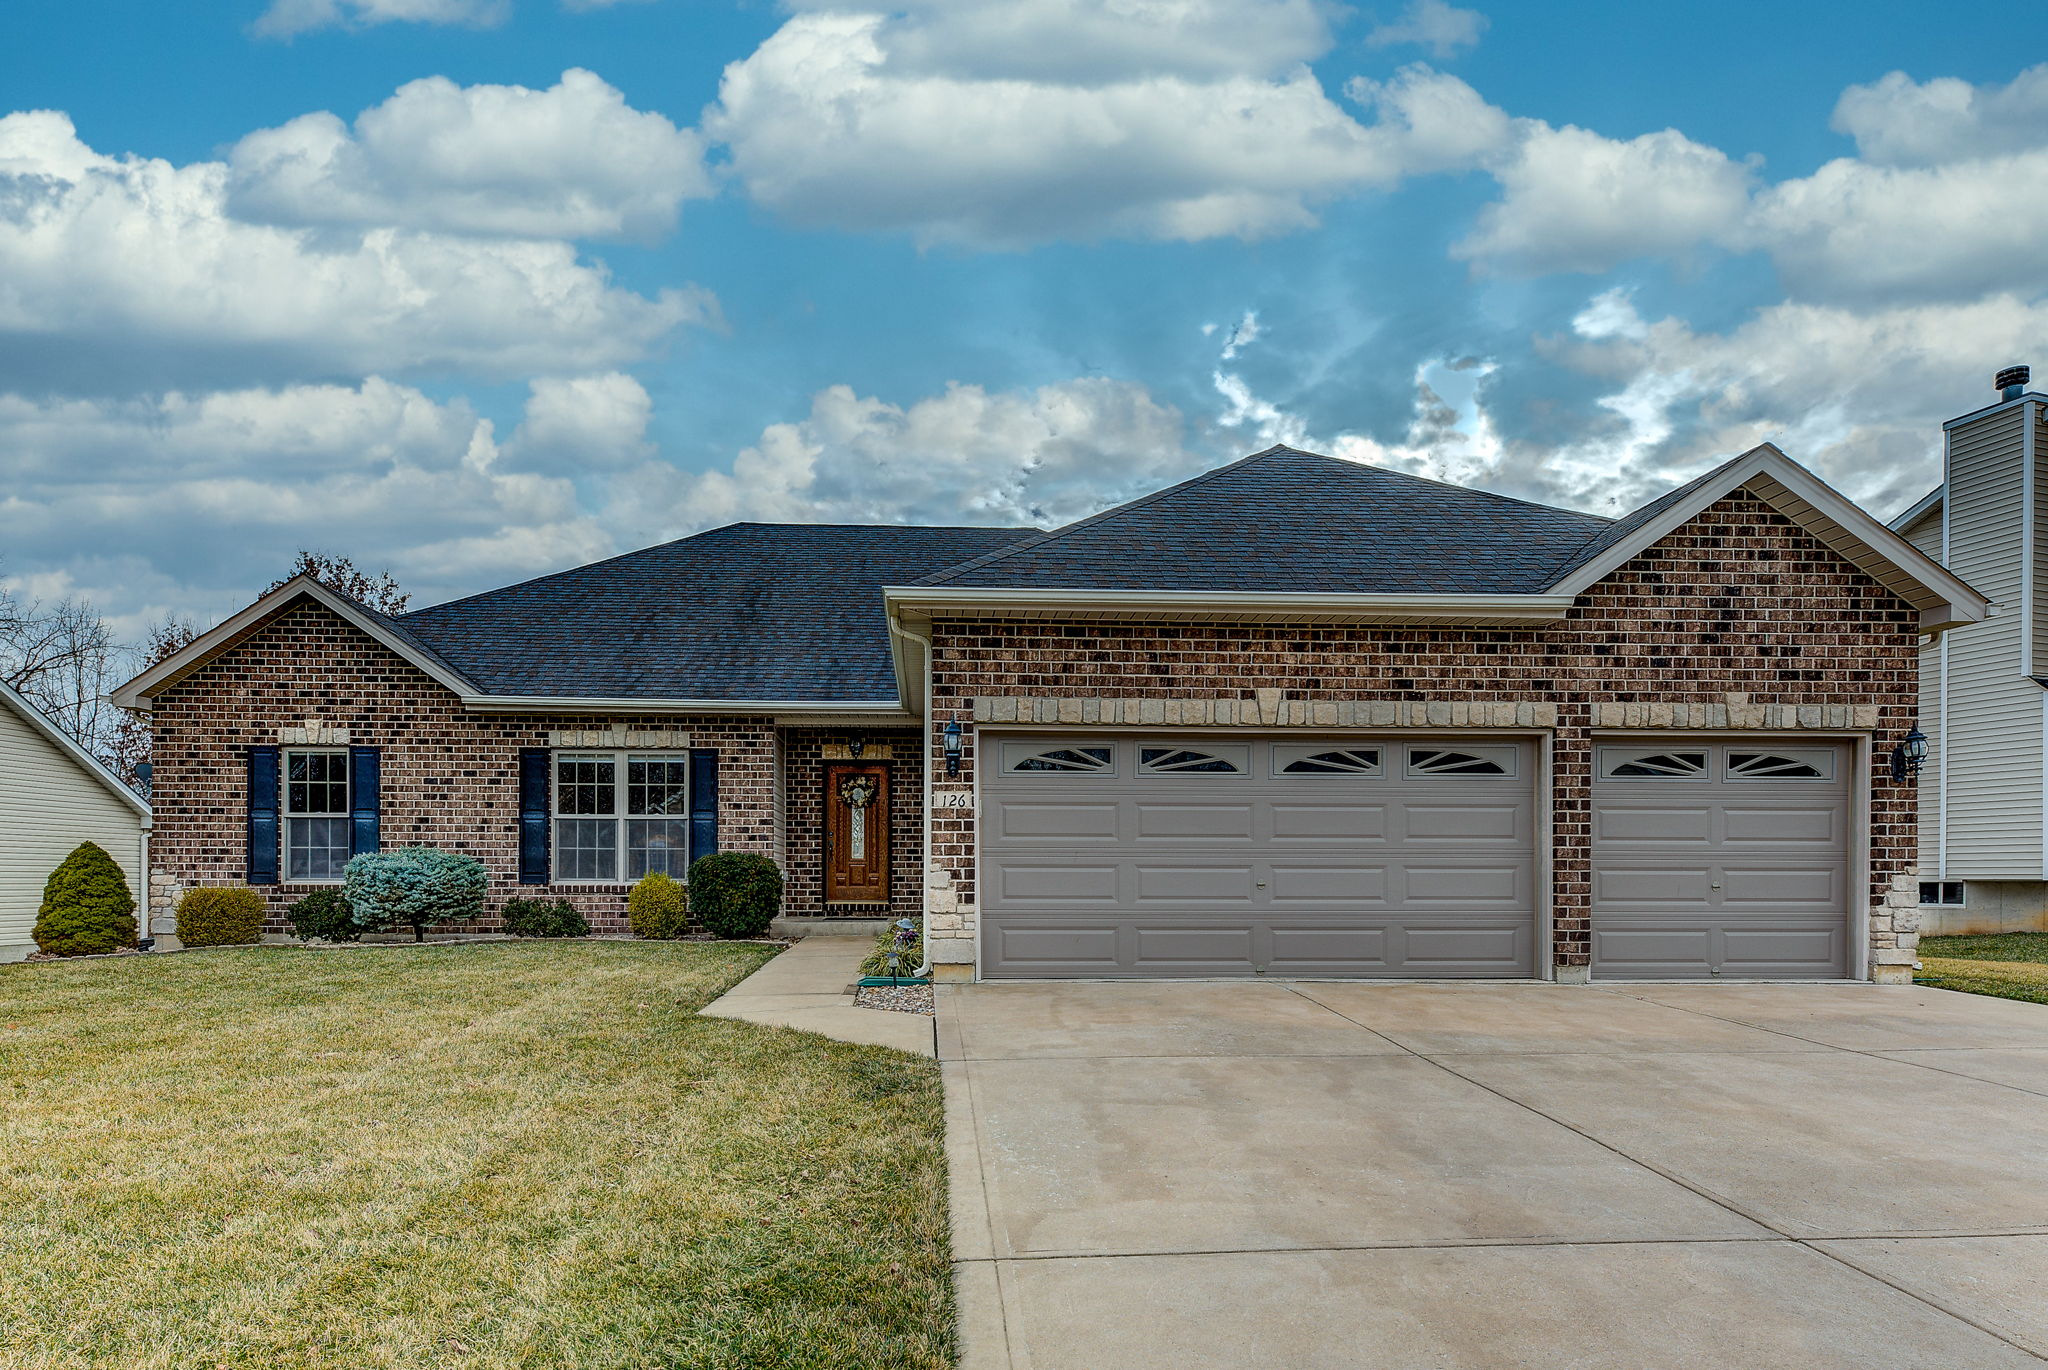  126 Timber Trace Crossing, Wentzville, MO 63385, US